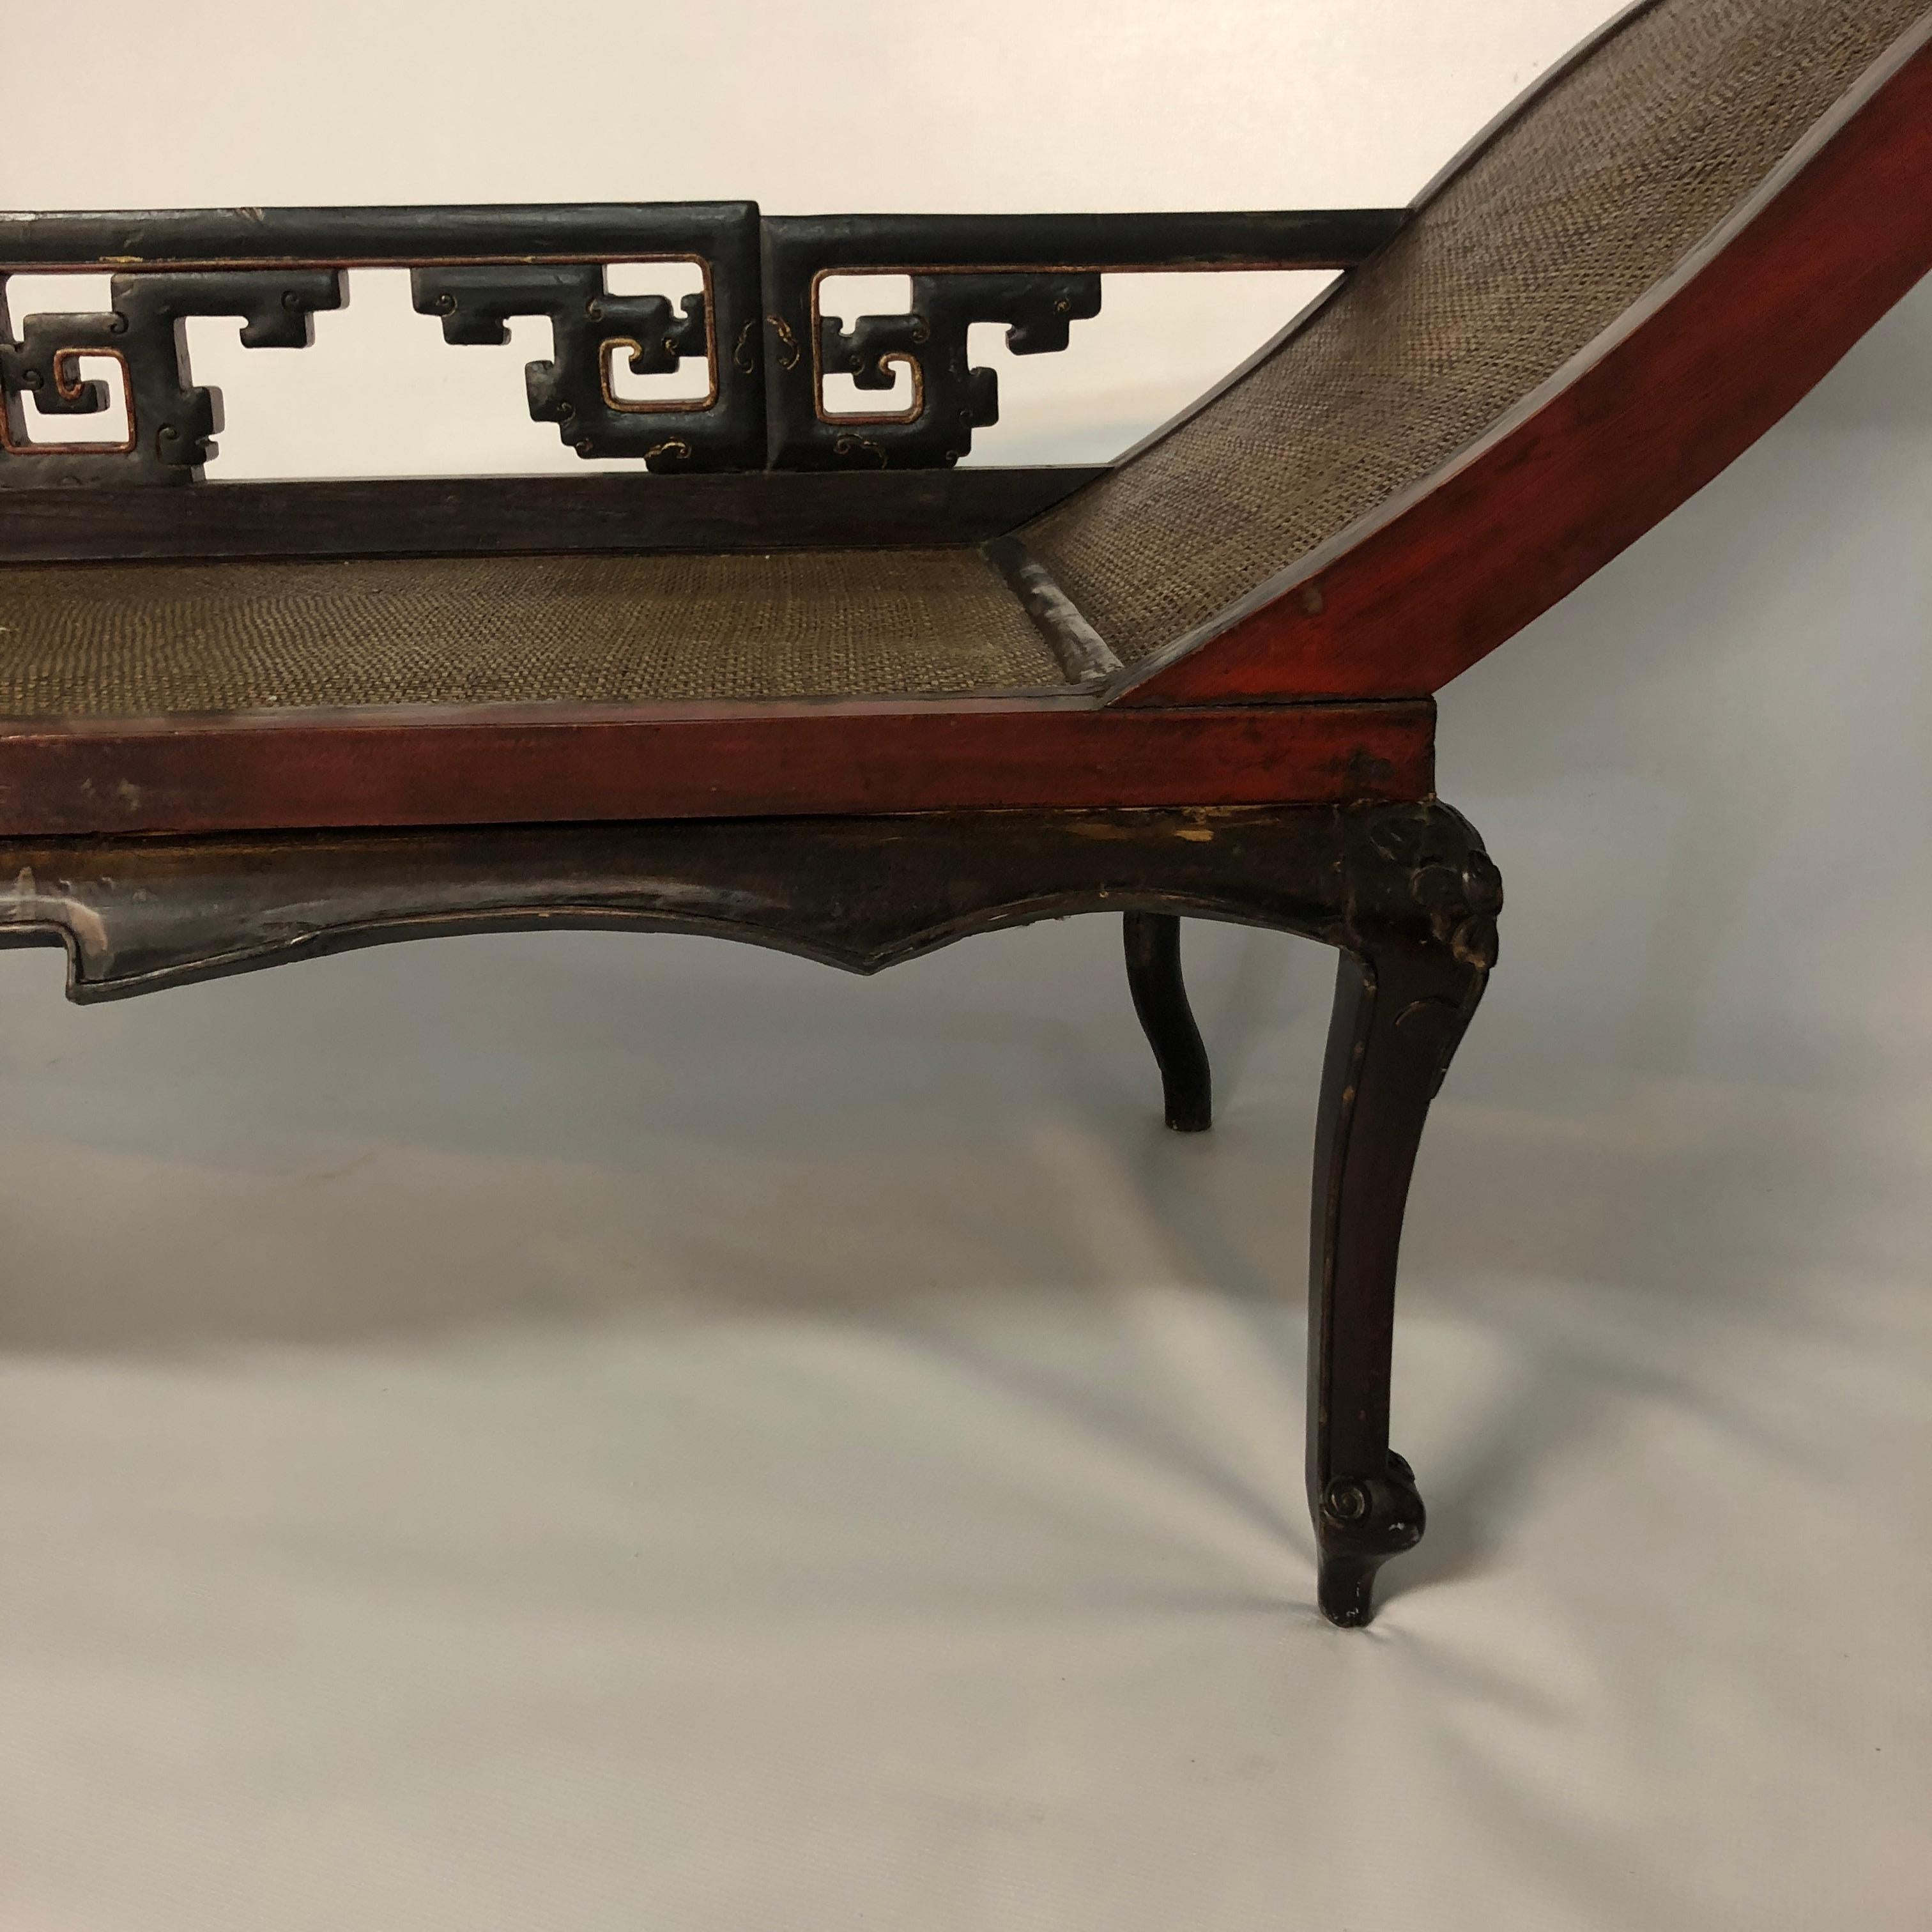 Chinese Hardwood Rattan Daybed Antique Qing Chaise Lounge Victorian Regency 1890 For Sale 6